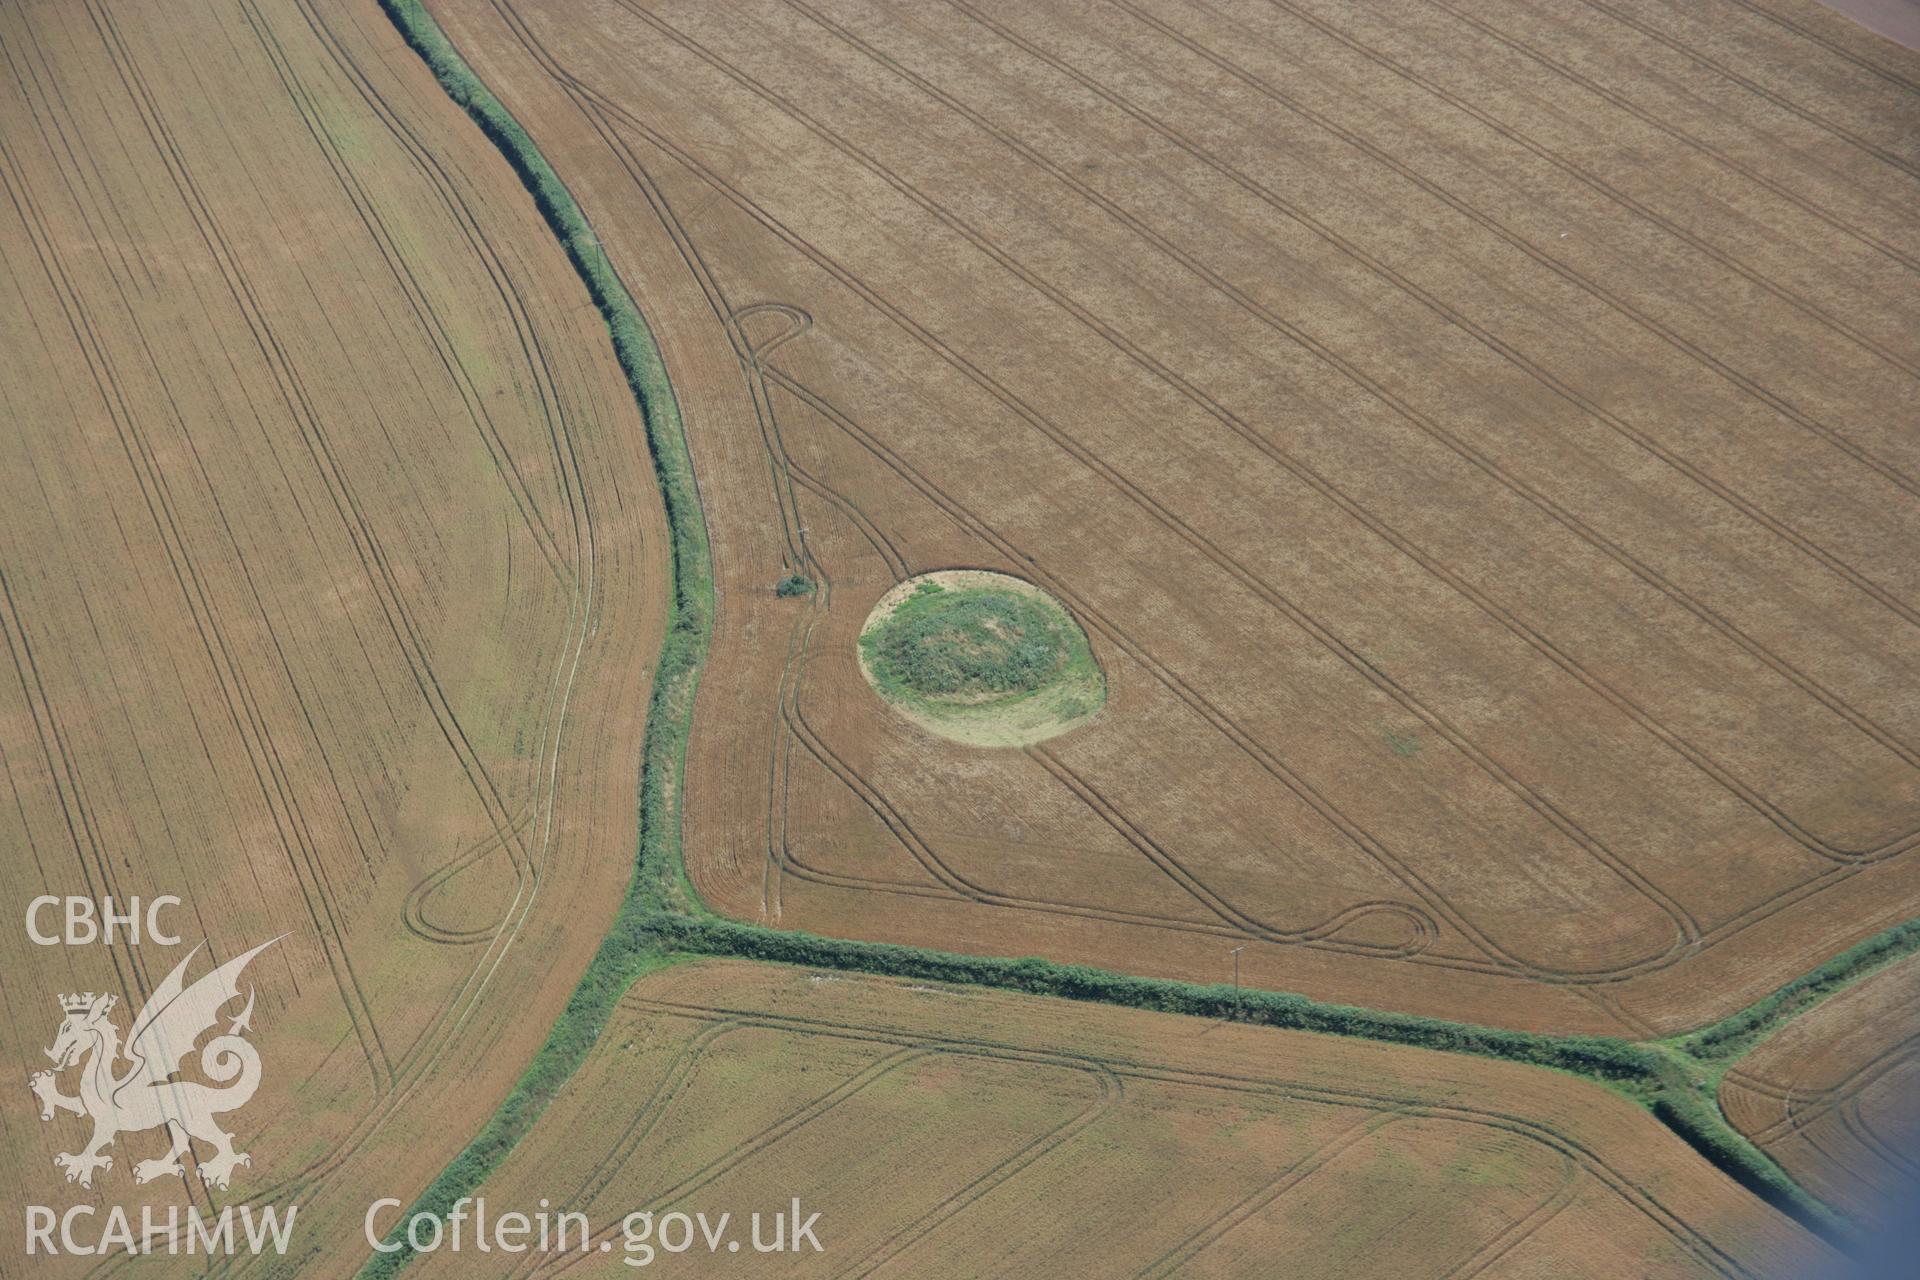 RCAHMW colour oblique aerial photograph of Mynydd Herbert Round Barrow. Taken on 24 July 2006 by Toby Driver.